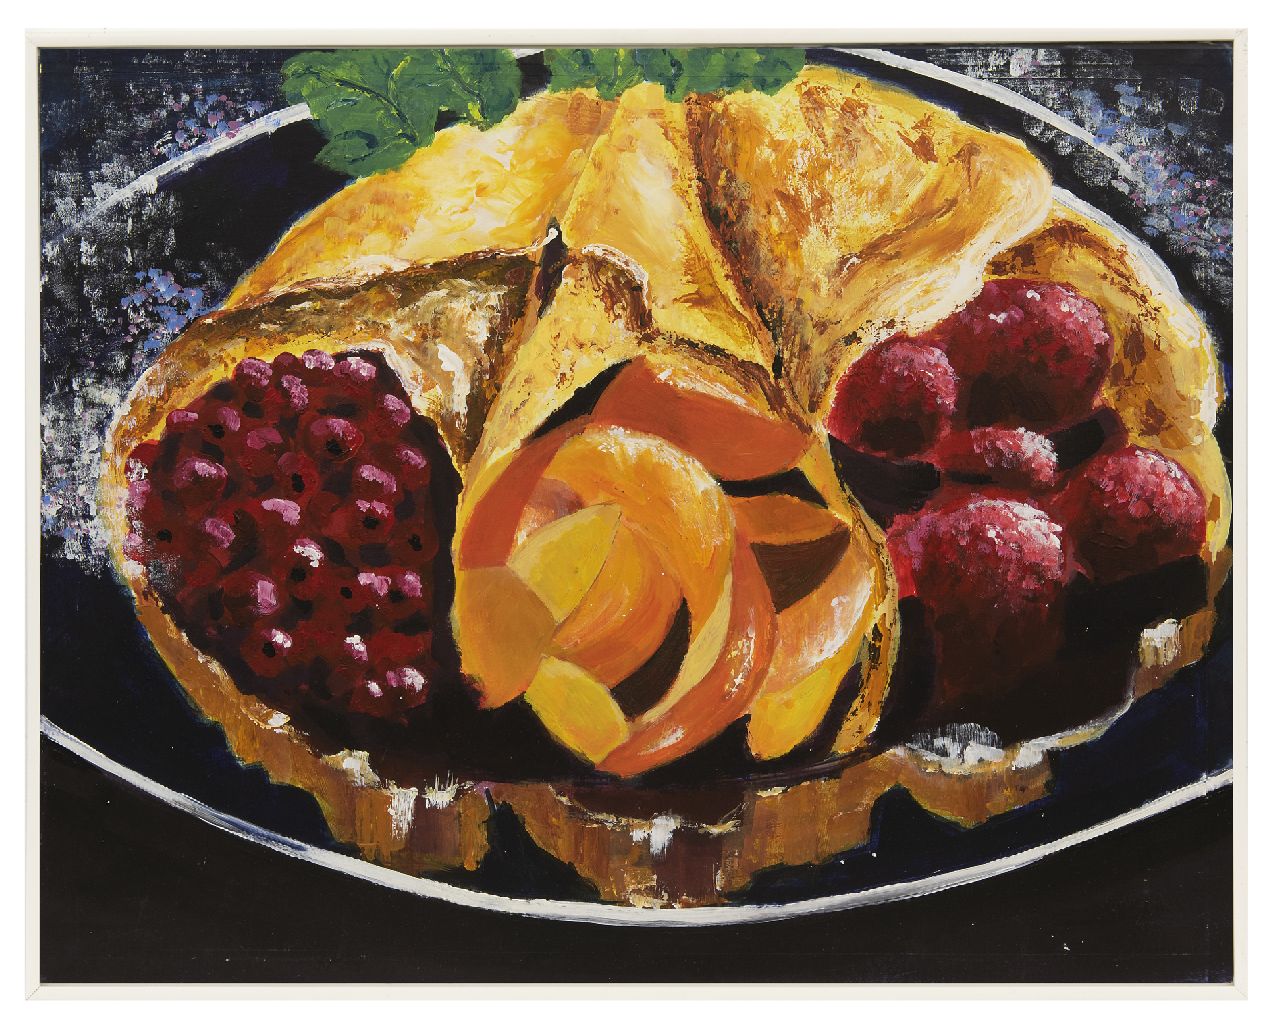 Onbekend 20e eeuw  | Onbekend | Watercolours and drawings offered for sale | Crêpes with fruit, gouache on paper 54.8 x 71.0 cm